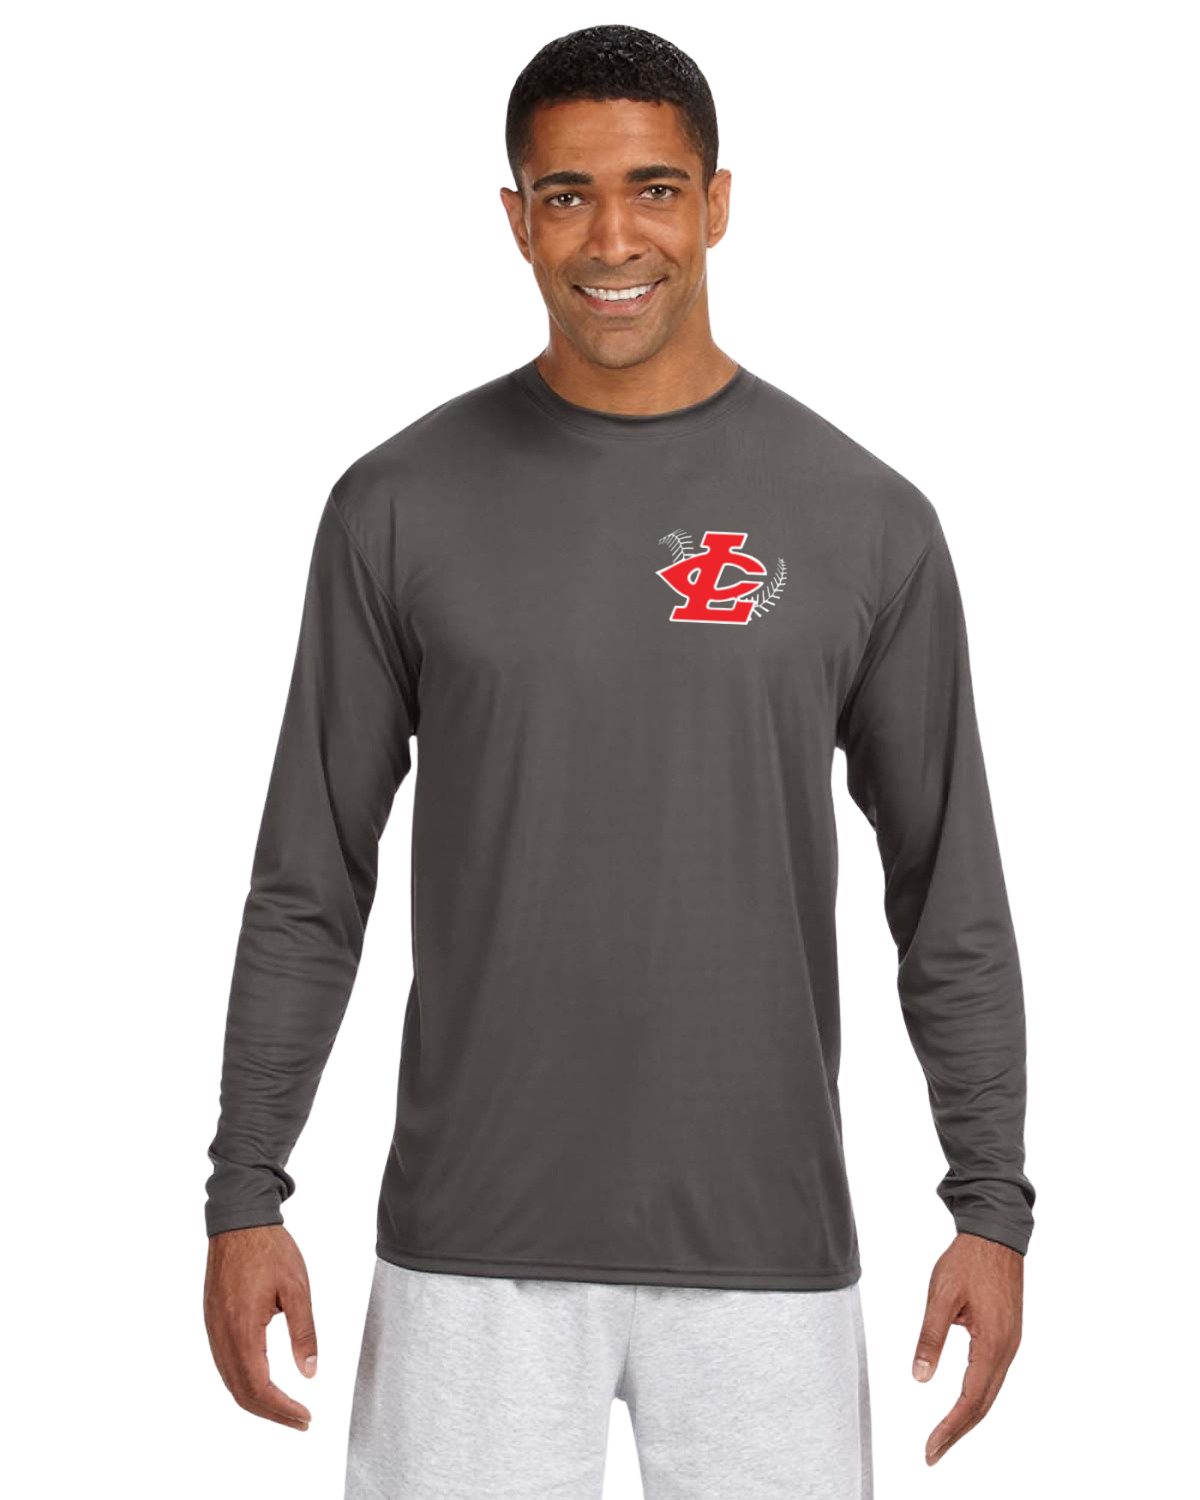 CLLL A4 Cooling Performance Long Sleeve T-Shirt GRAY